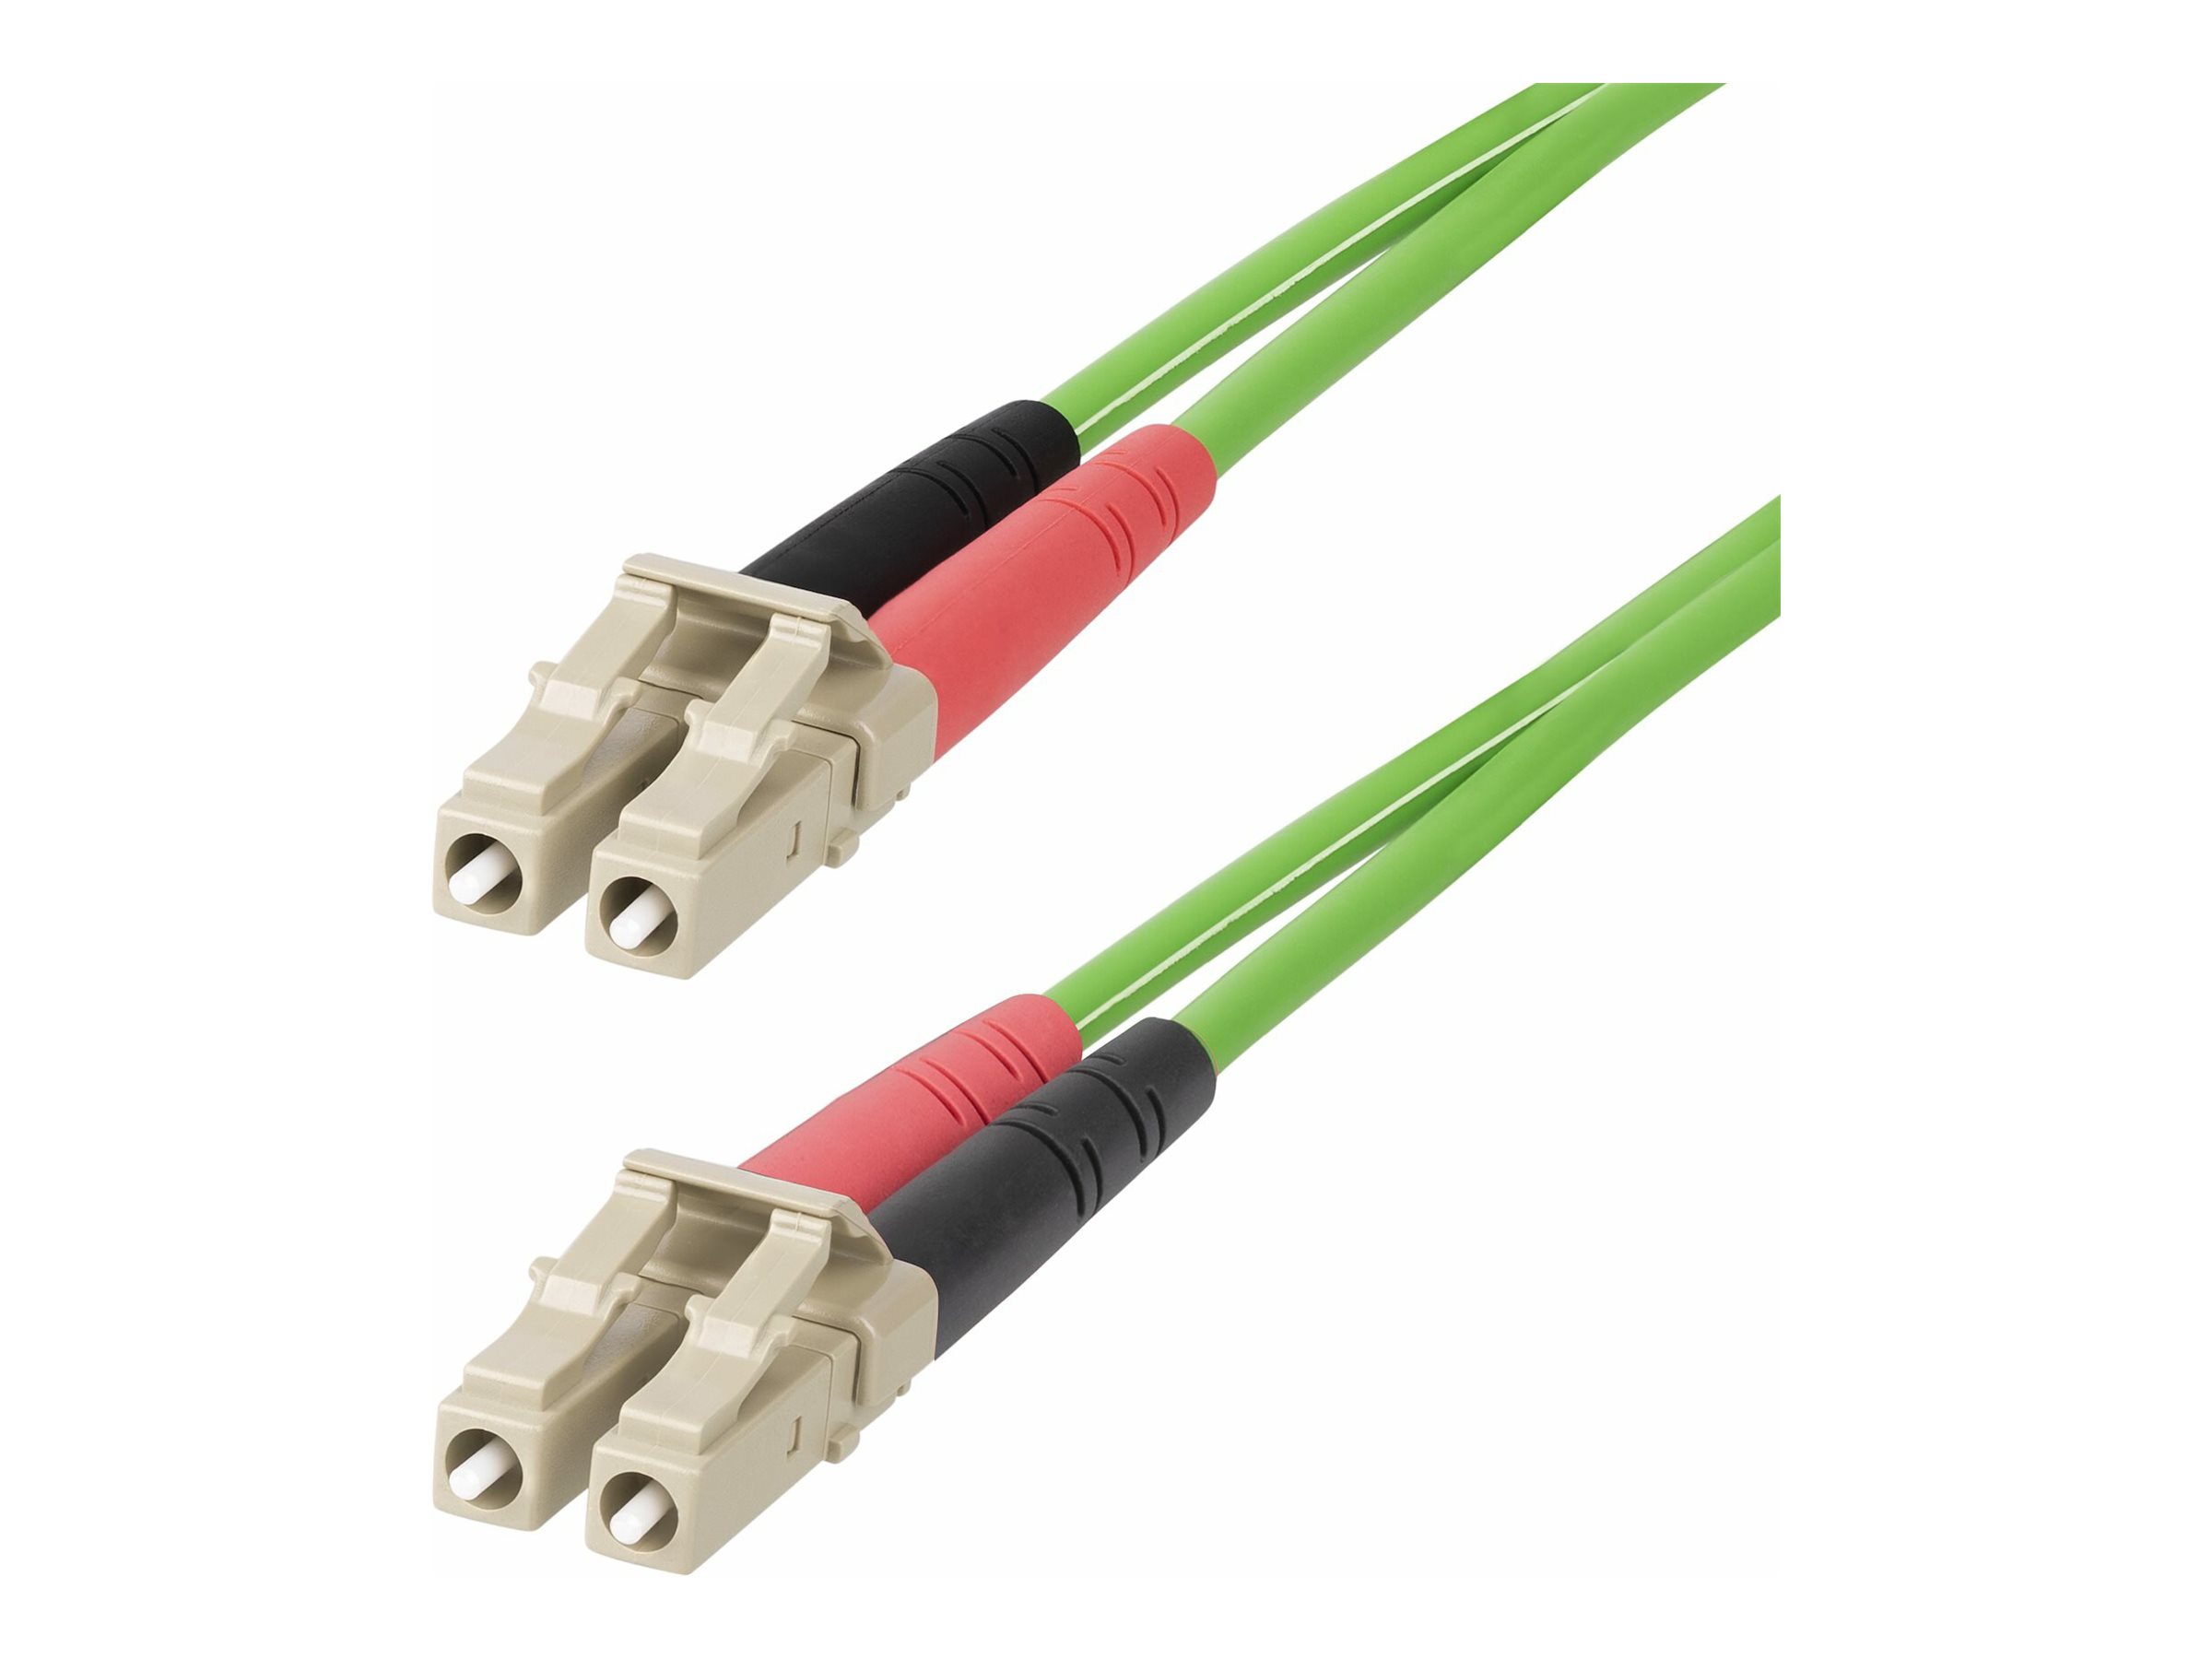 StarTech.com 3m (10ft) LC to LC (UPC) OM5 Multimode Fiber Optic Cable, 50/125m Duplex LOMMF Zipcord, VCSEL, 40G/100G, Bend Inse